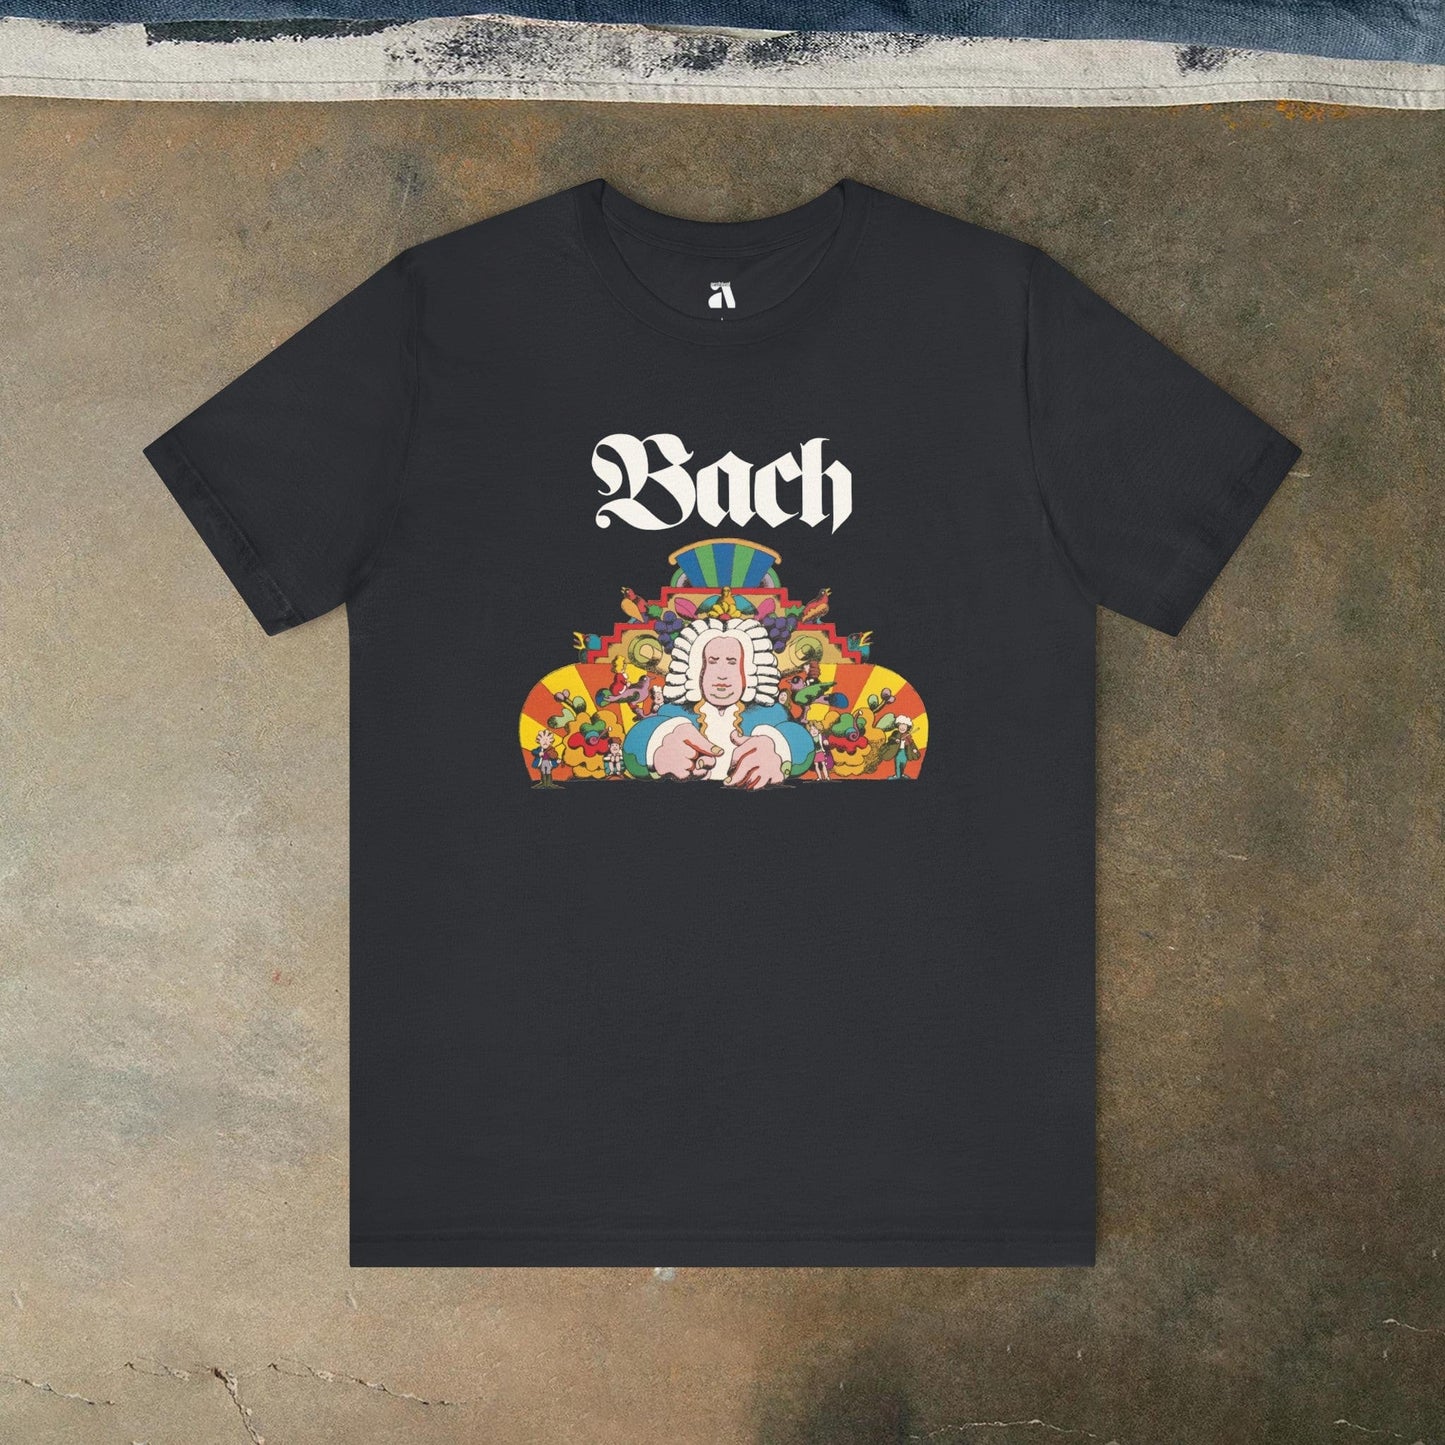 Bach: Illustrated T-Shirt